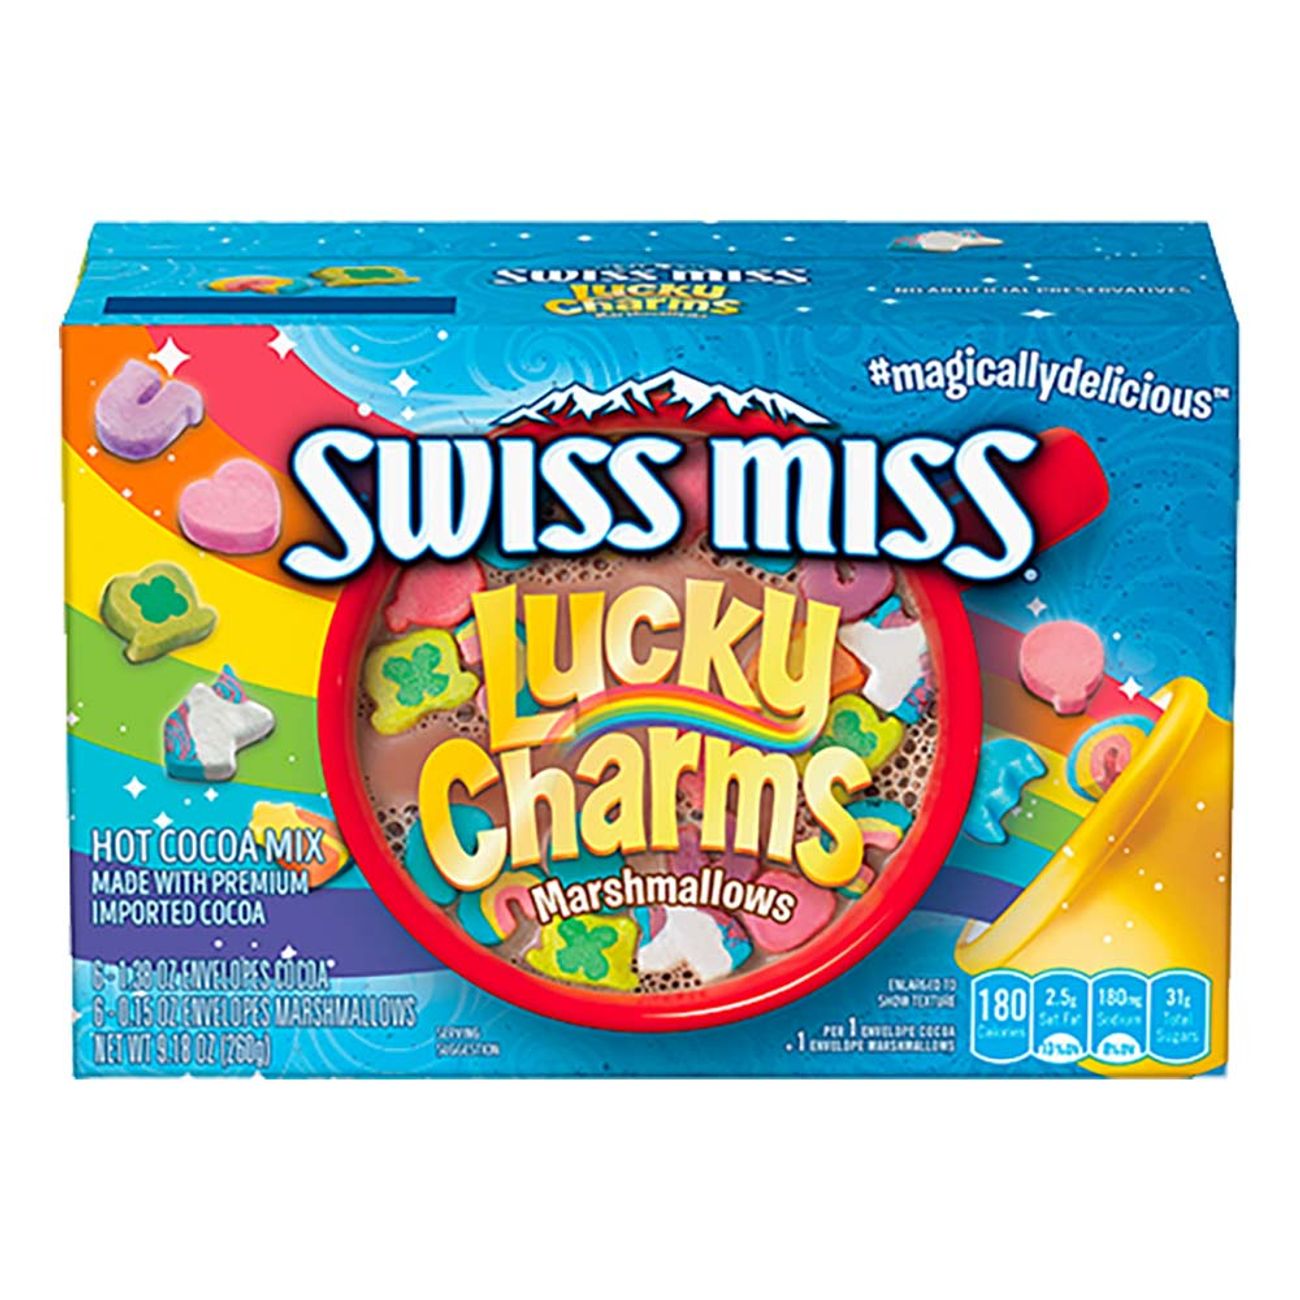 swiss-miss-lucky-charms-marshmallows-hot-cocoa-mix-92486-1